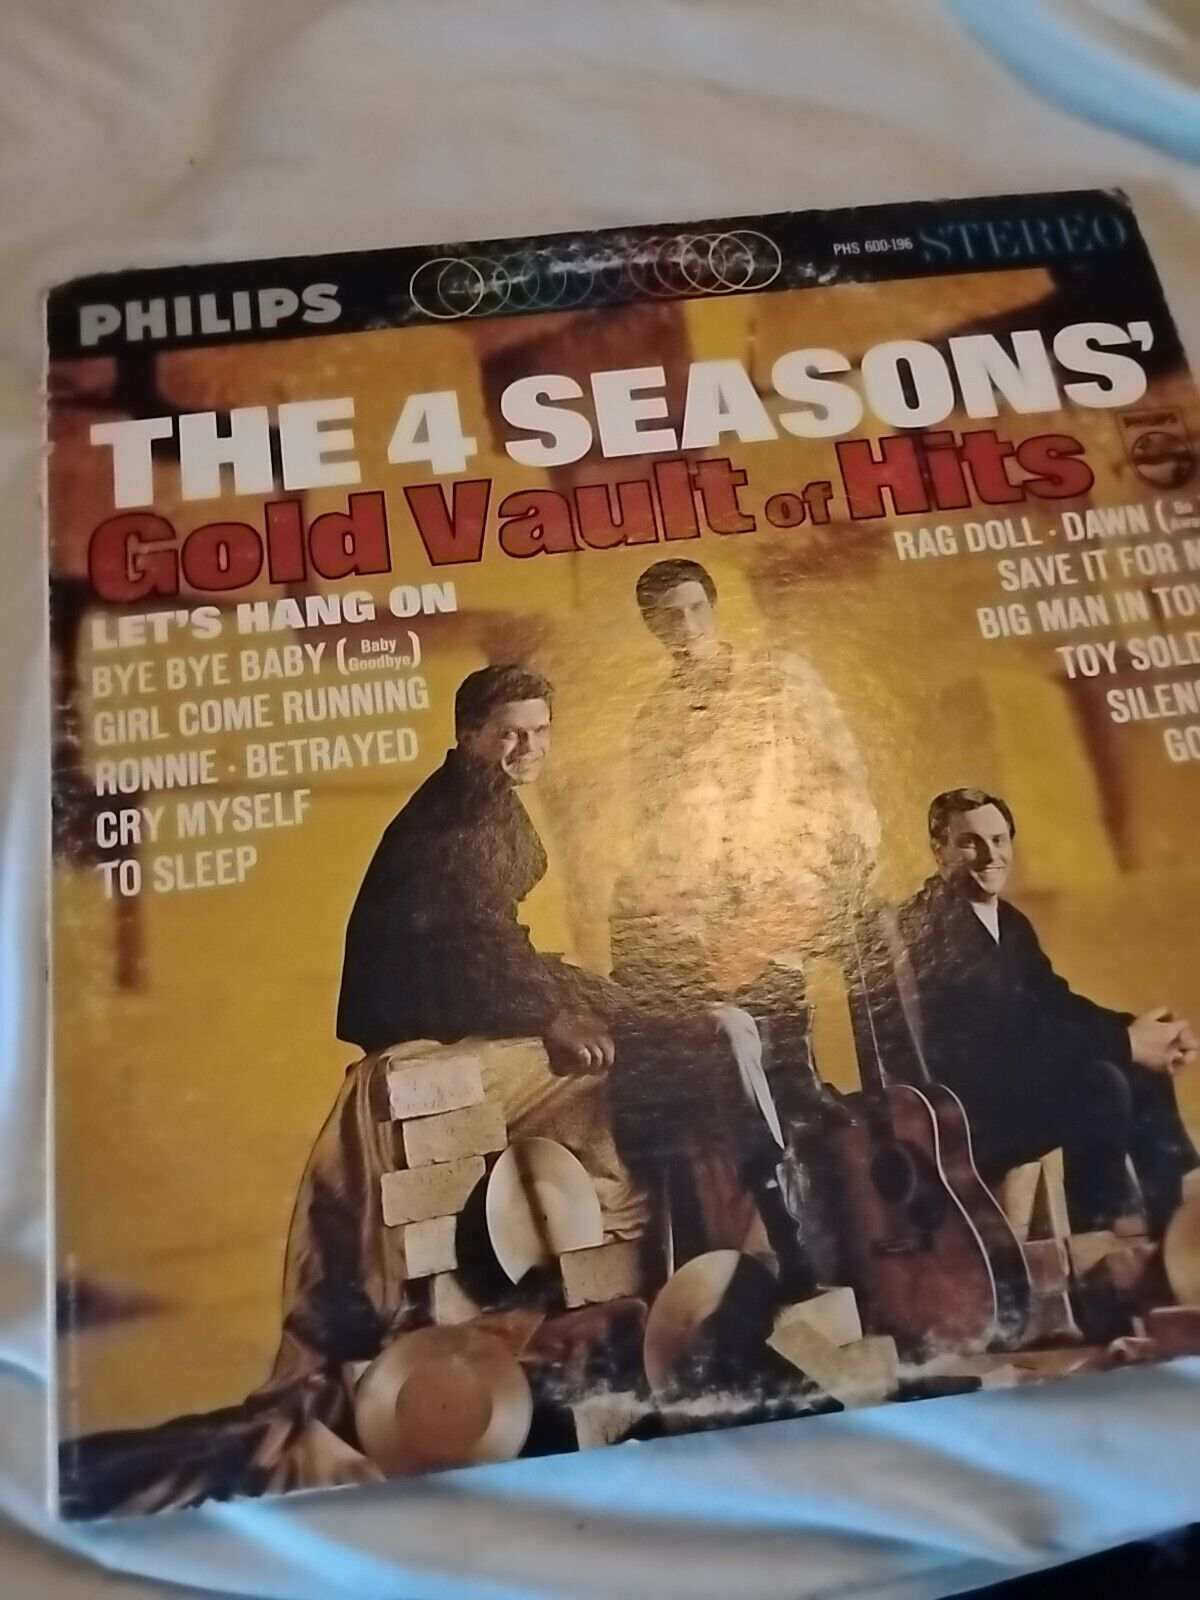 The 4 Seasons And Frankie Valli Gold Vault Of Hits LP Vinyl Record PHS 600-196